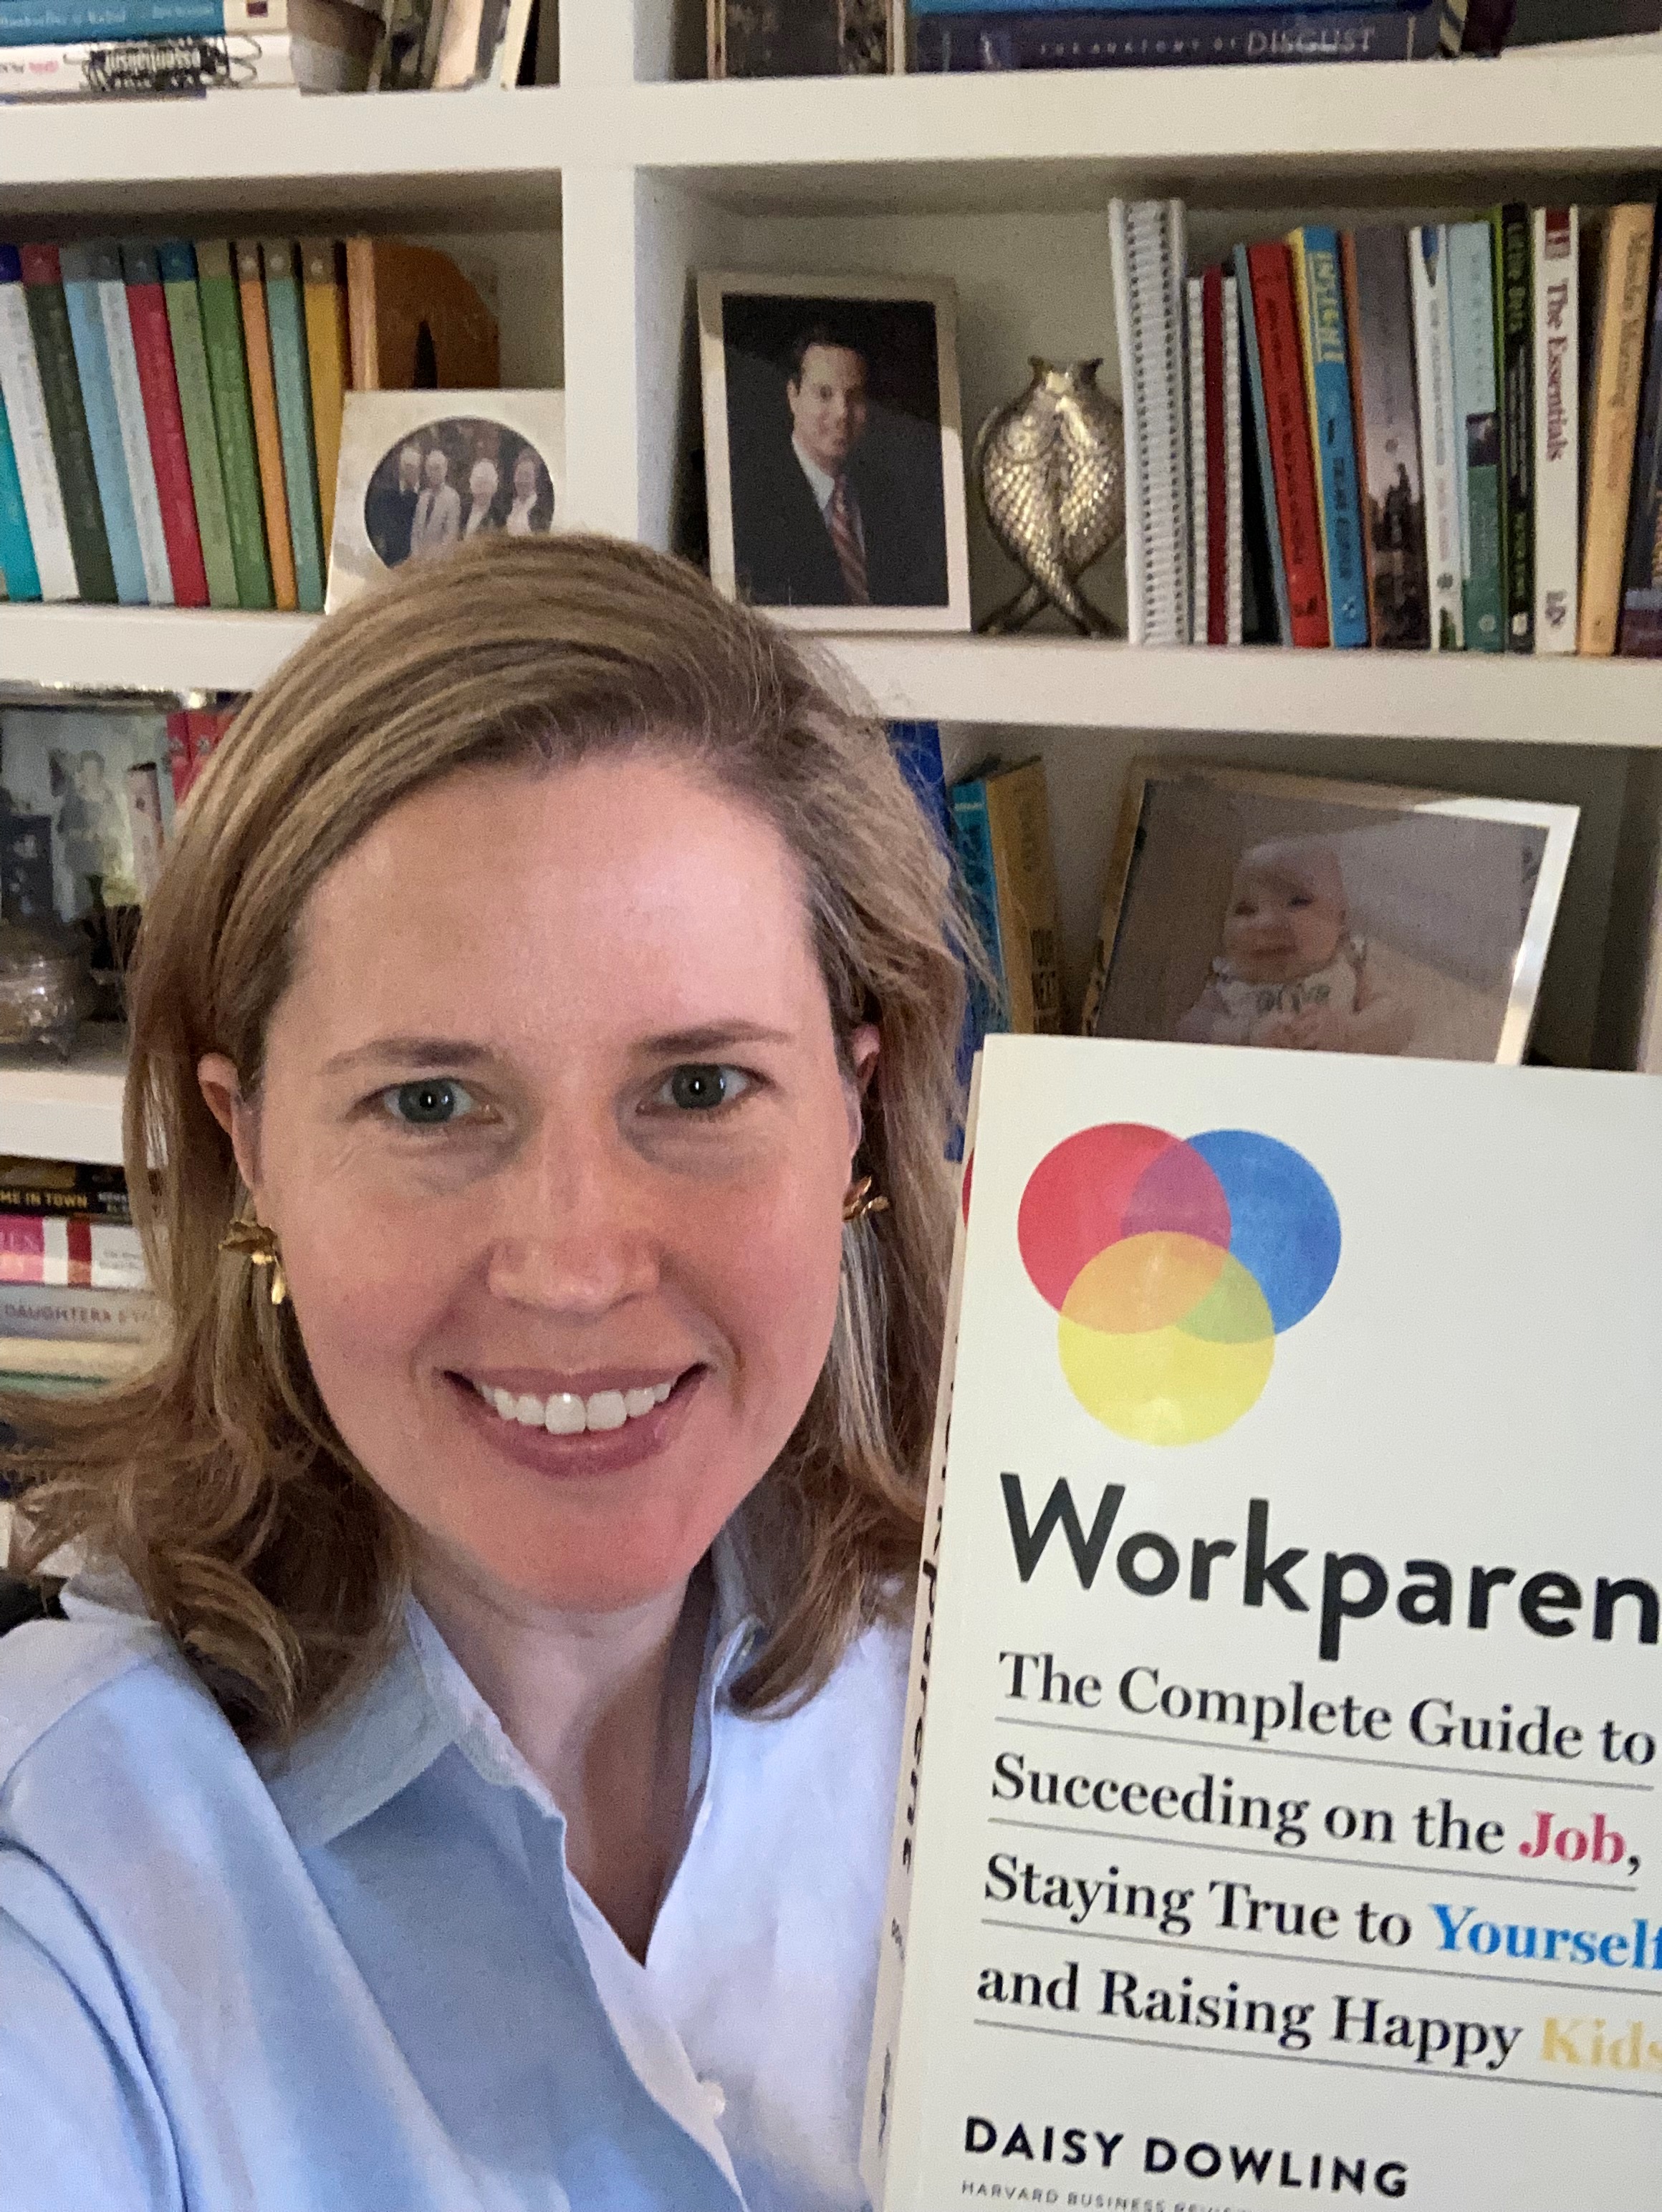 Daisy Dowling, founder and CEO of Workparent, an executive coaching and training firm that supports working moms and dads and author of the book of the same name. 